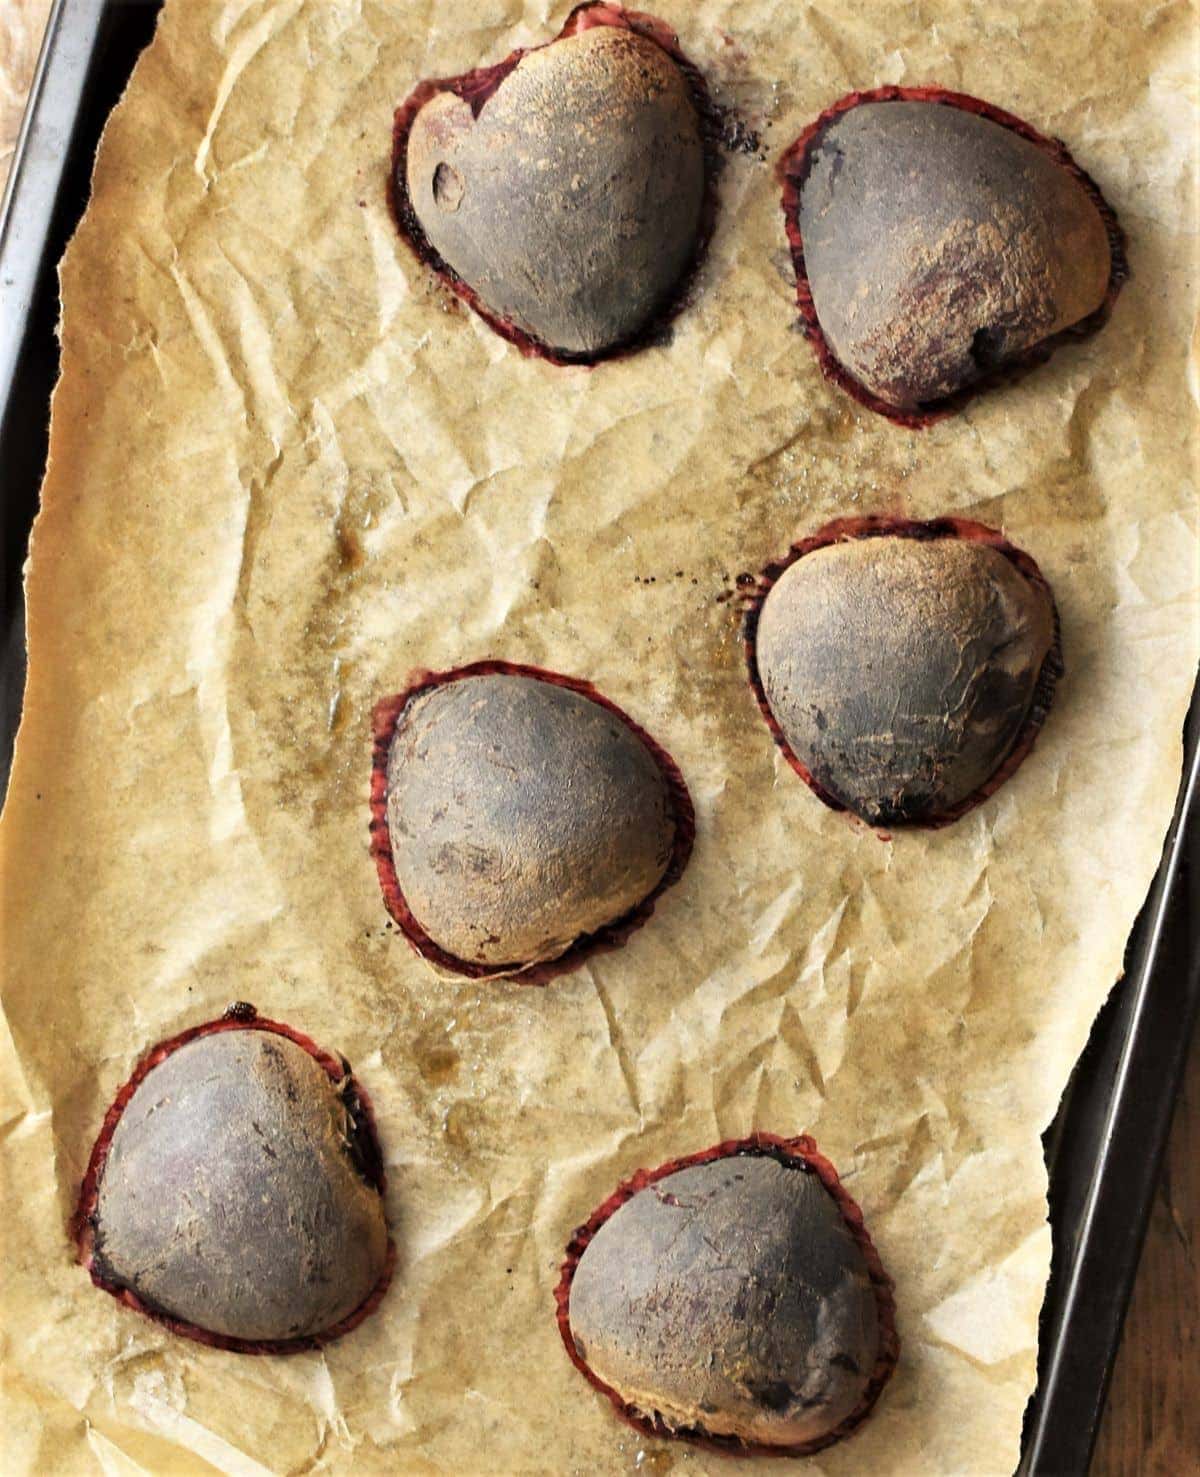 6 roasted beetroot halves on top of parchment.